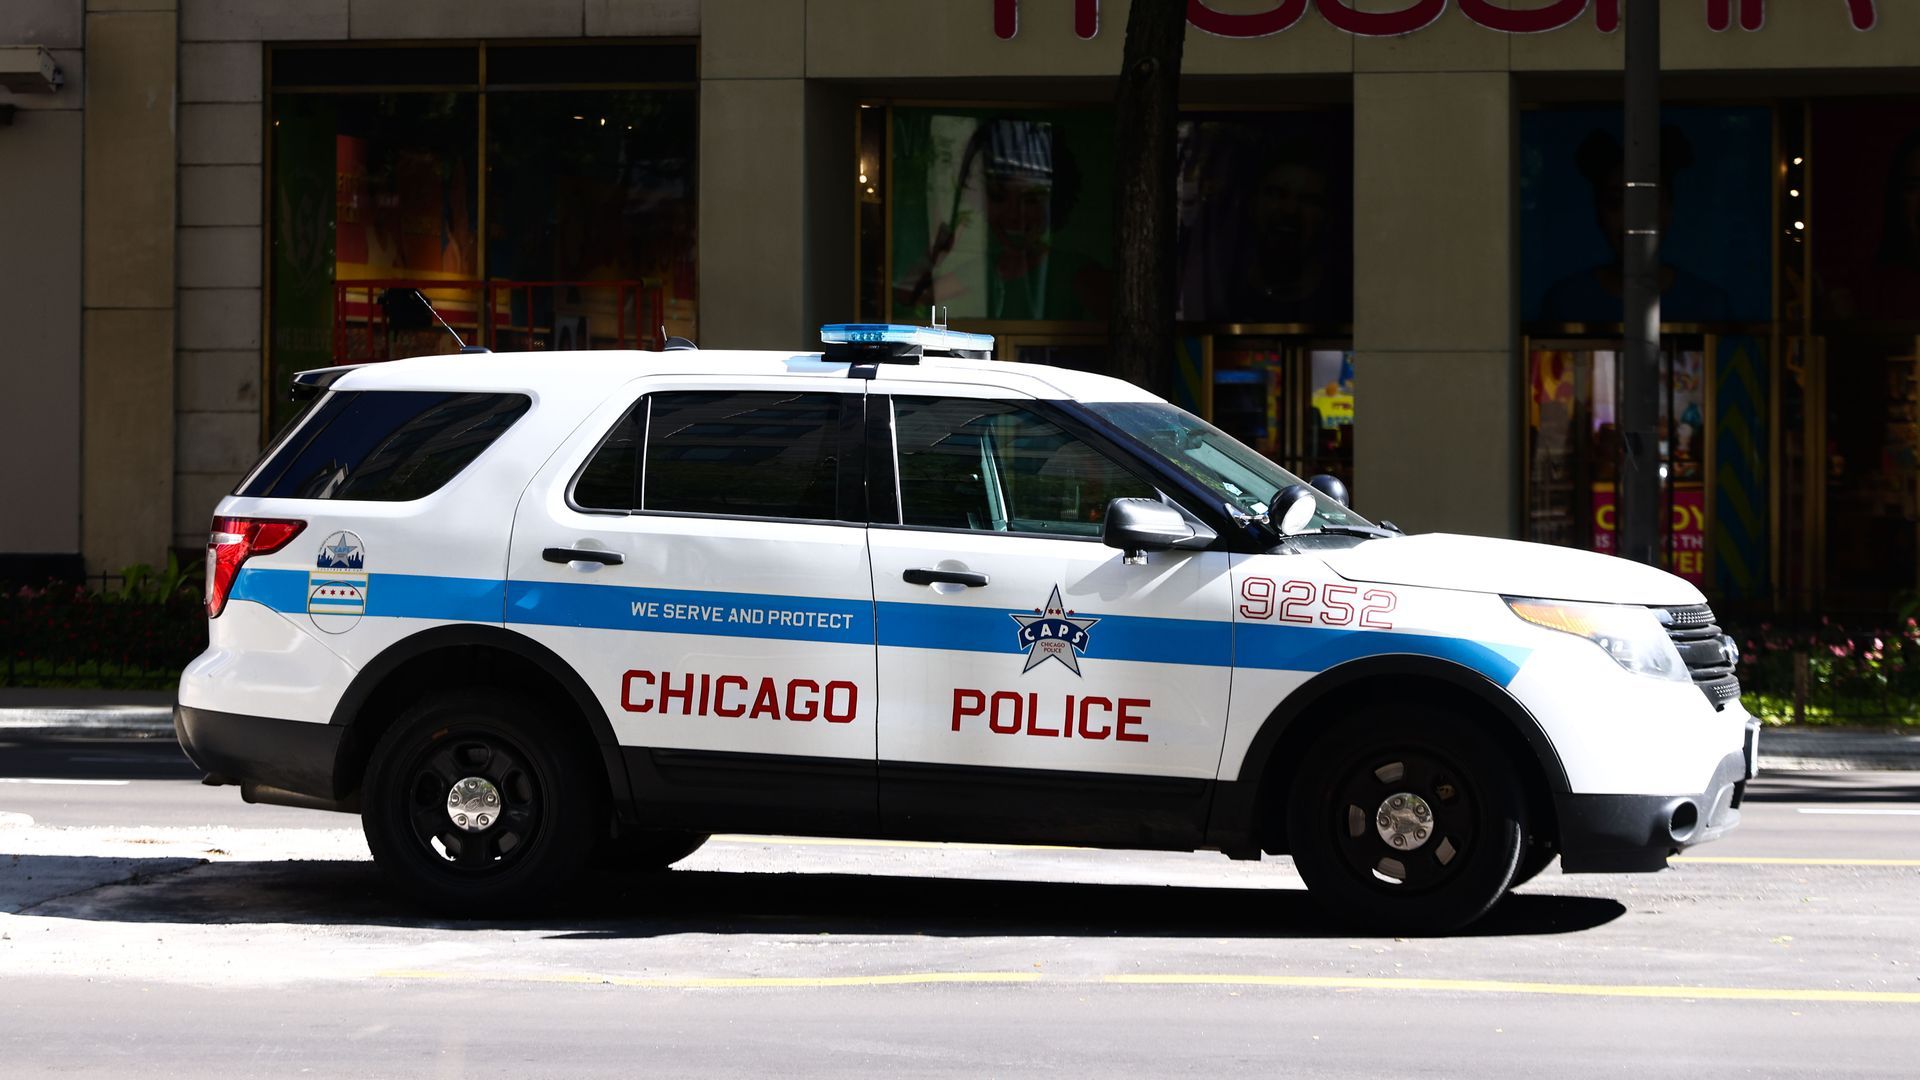 The side of a Chicago police SUV in downtown Chicago.